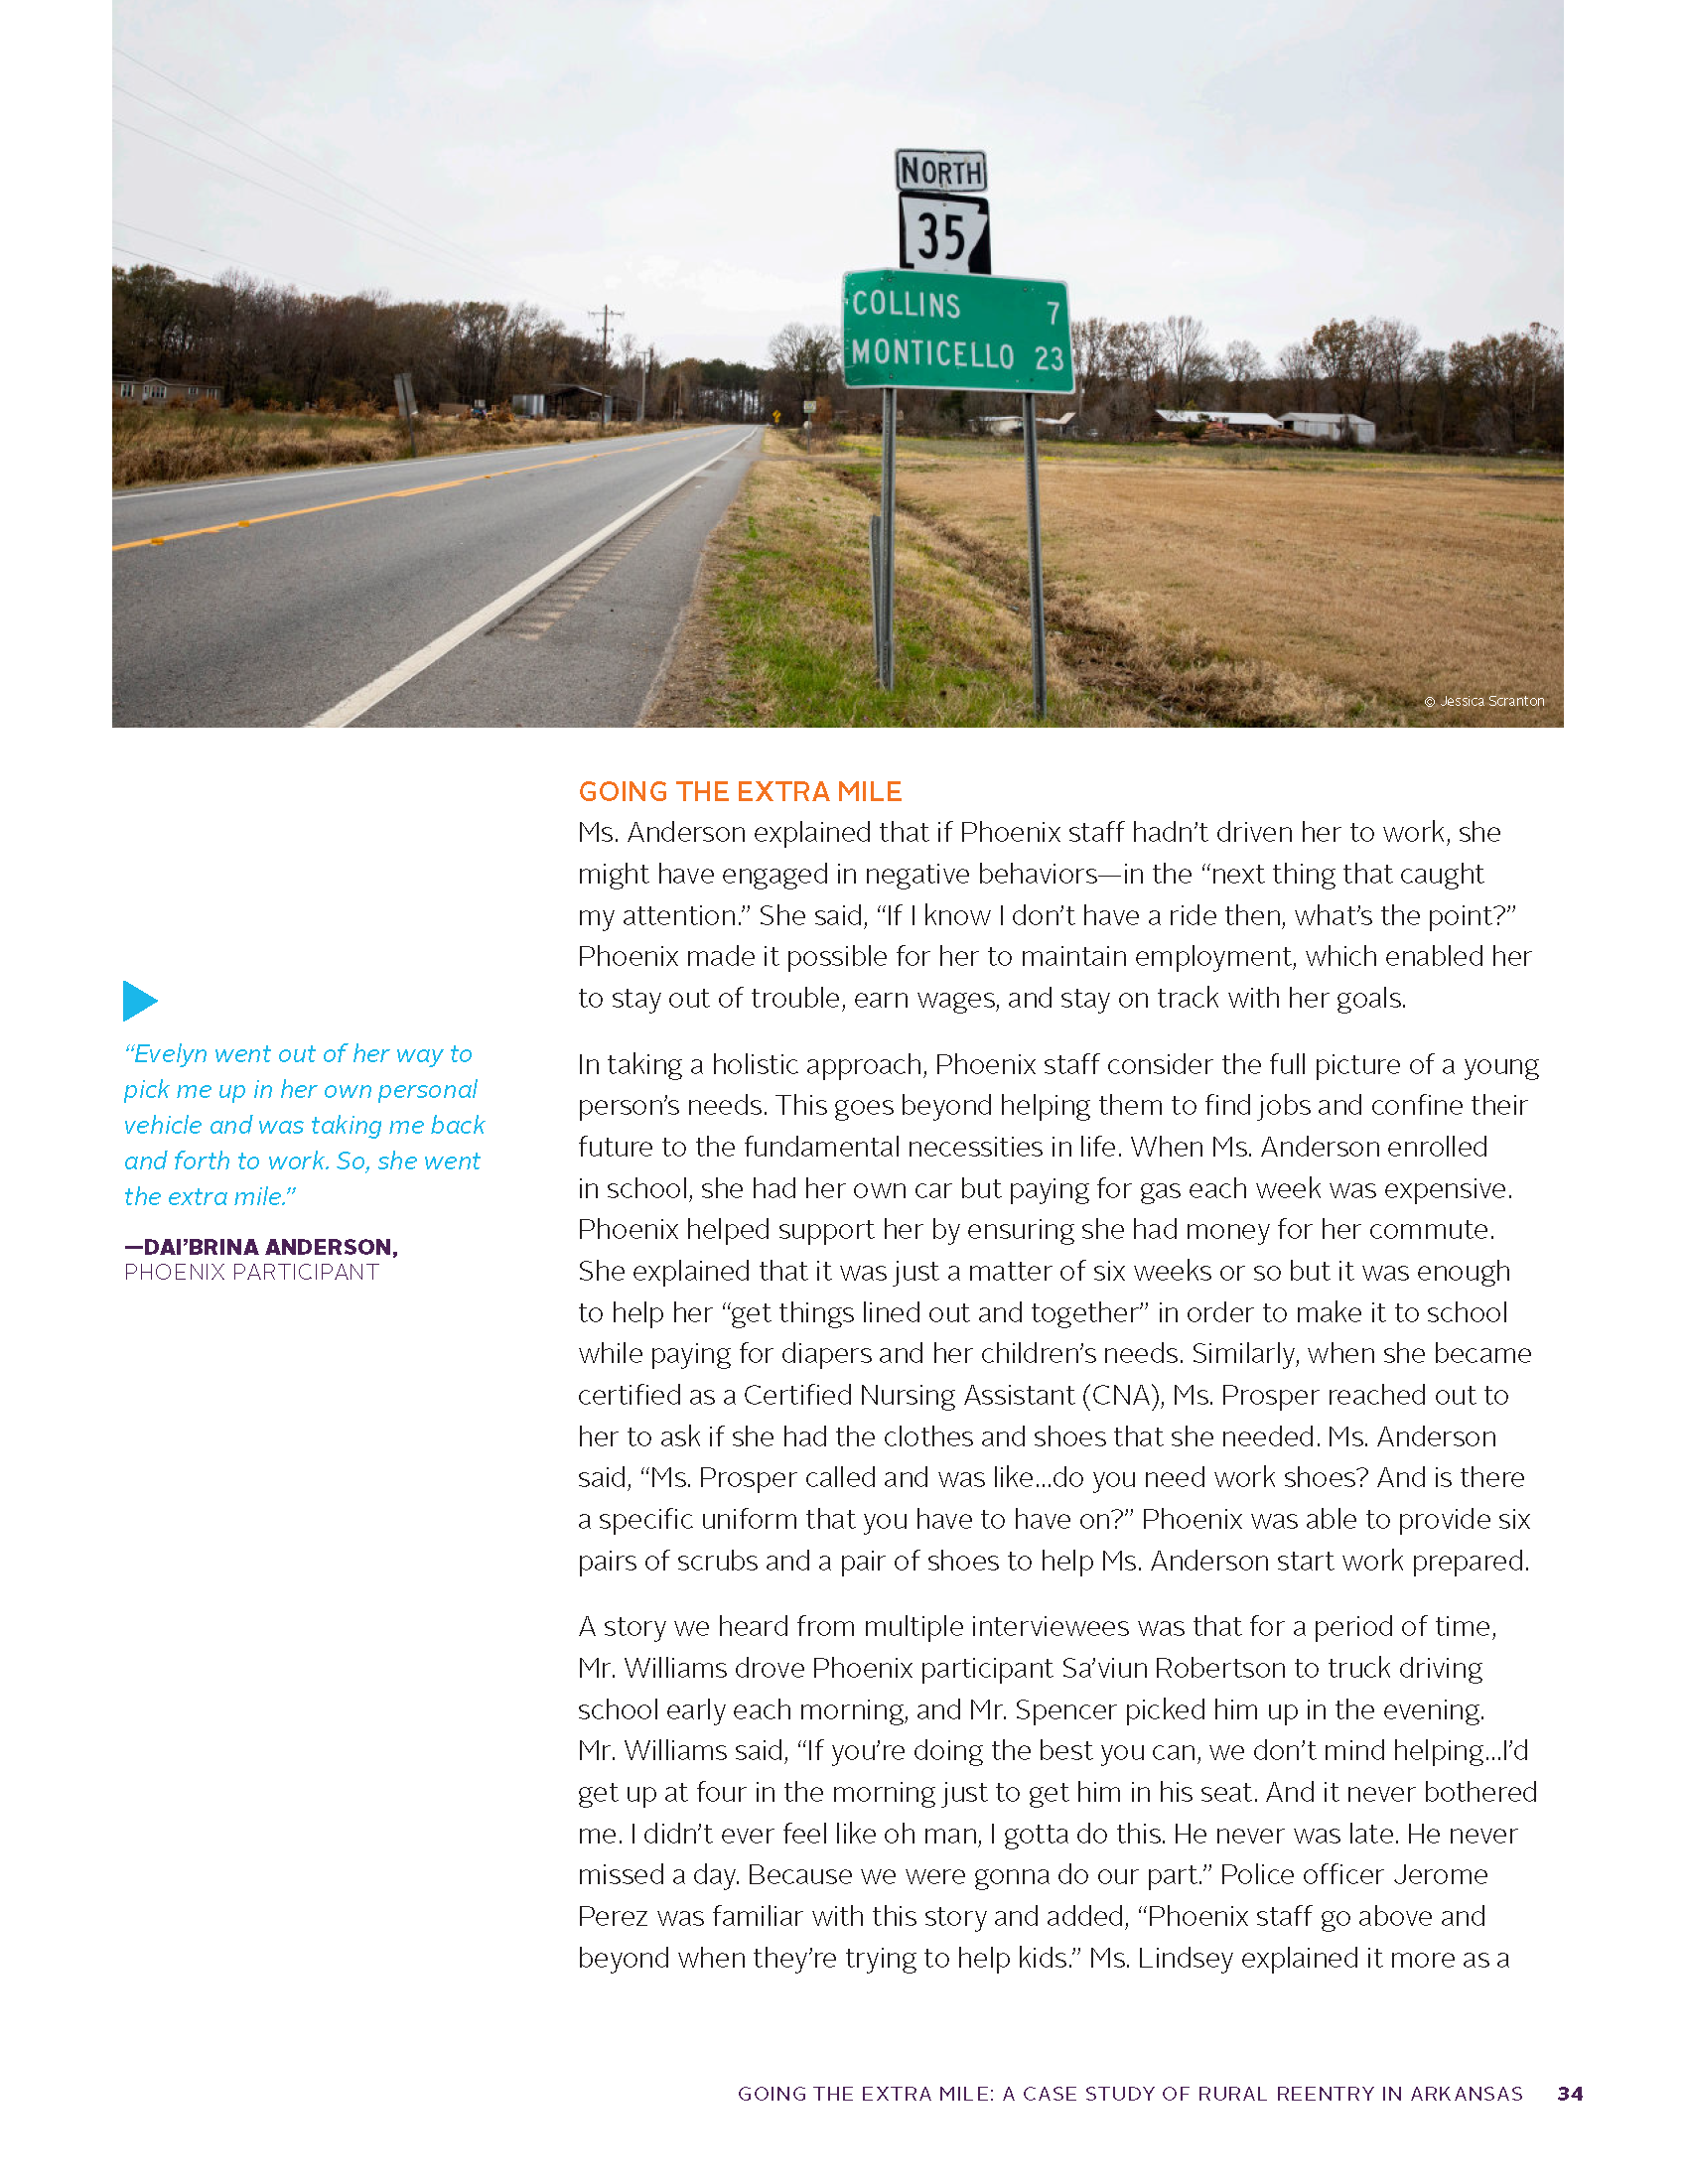 going-extra-mile-rural-reentry-arkansas (1)_Page_34.png